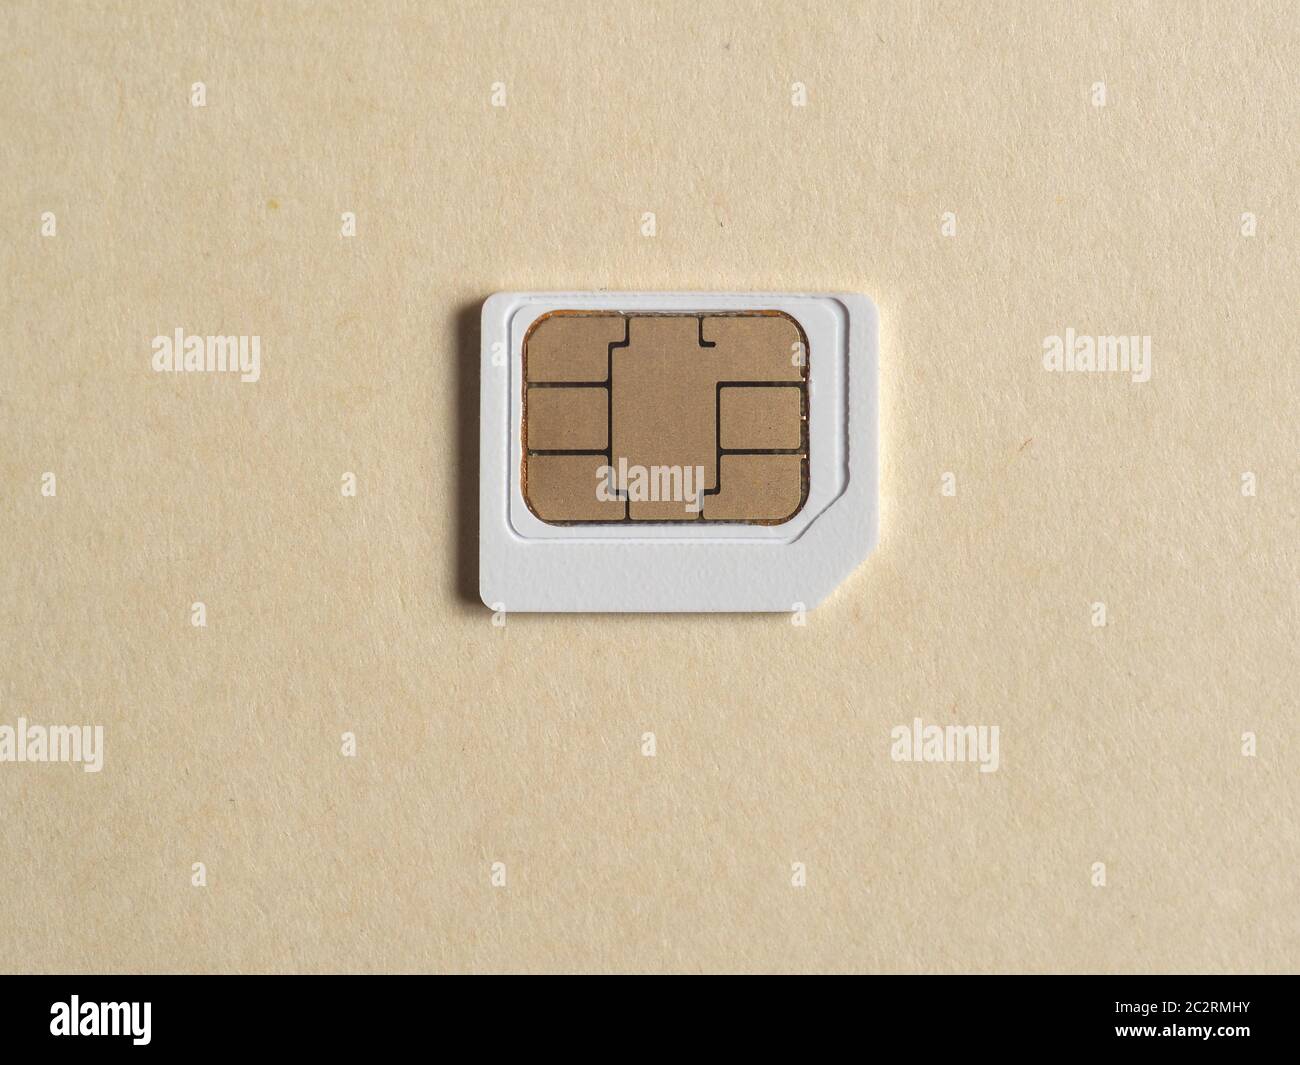 Trio sim card (including standard, micro and nano size) for mobile phone Stock Photo